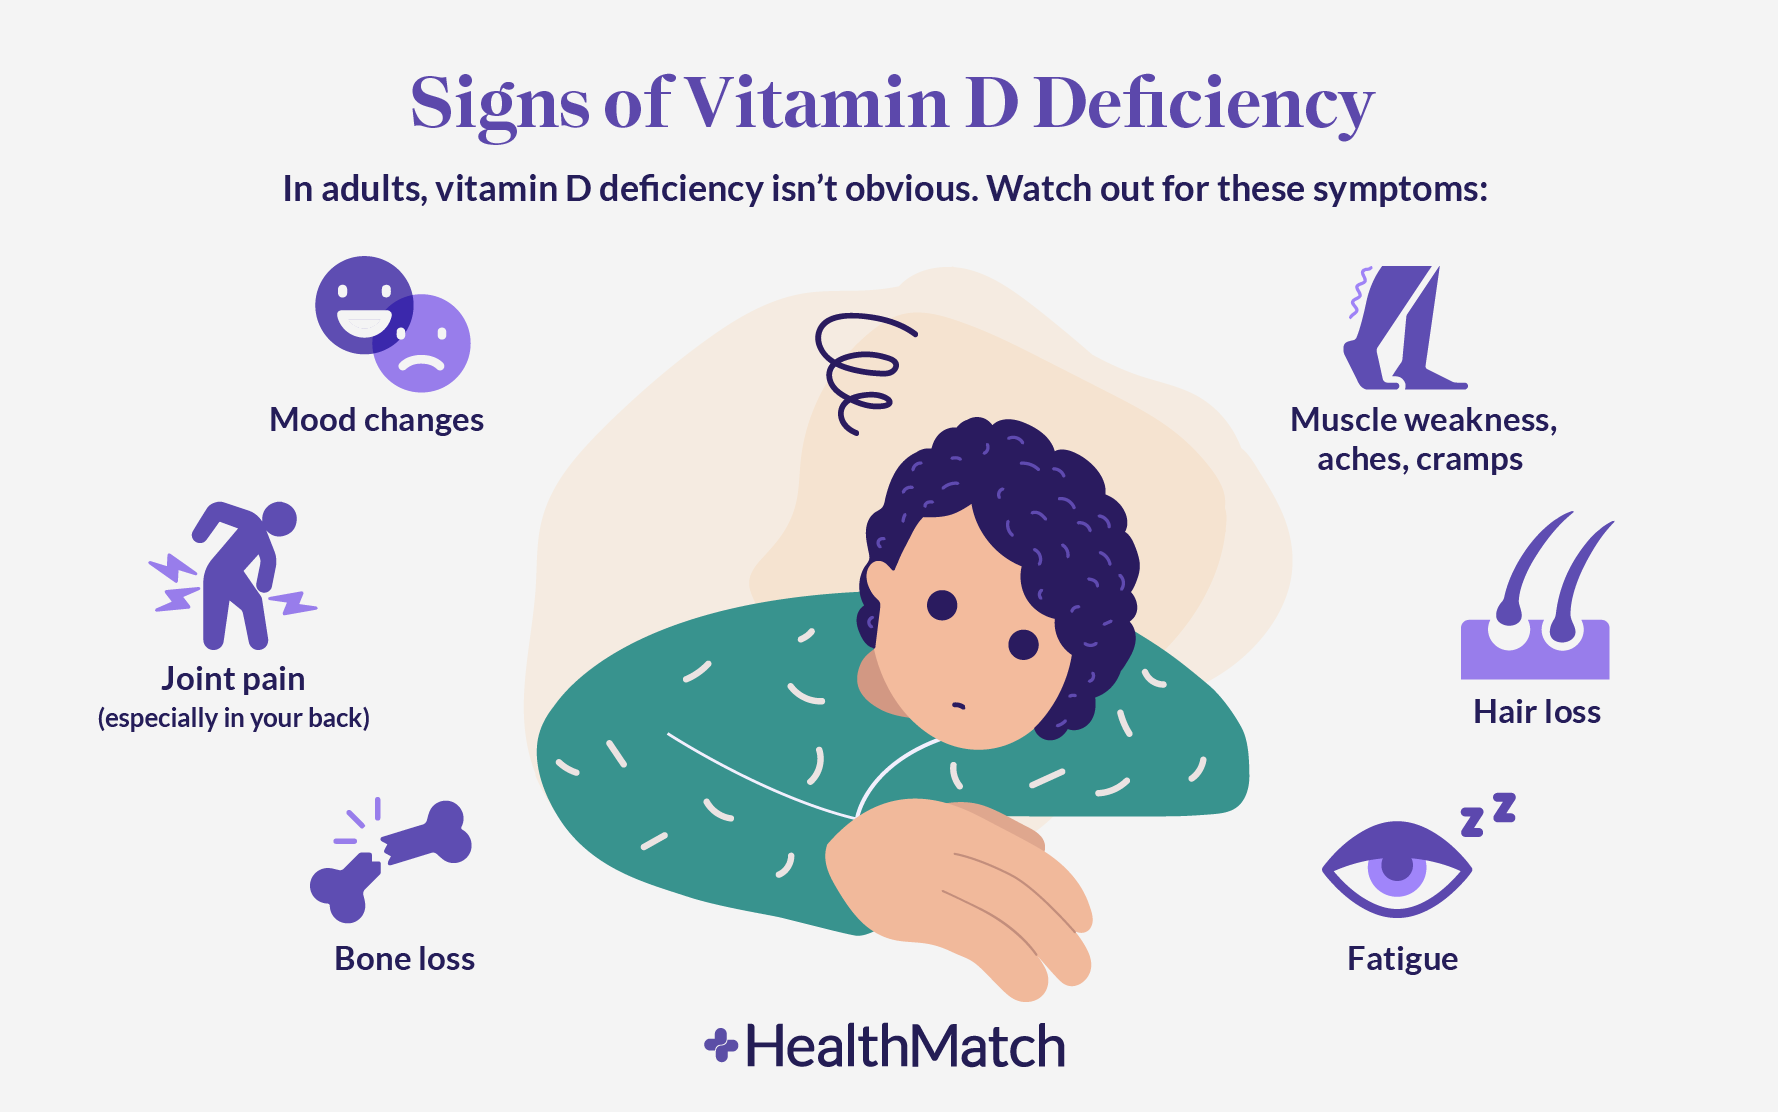 HealthMatch - 42% Of Americans Are Deficient In Vitamin D. Are You At Risk?  If So, What Can You Do About It?